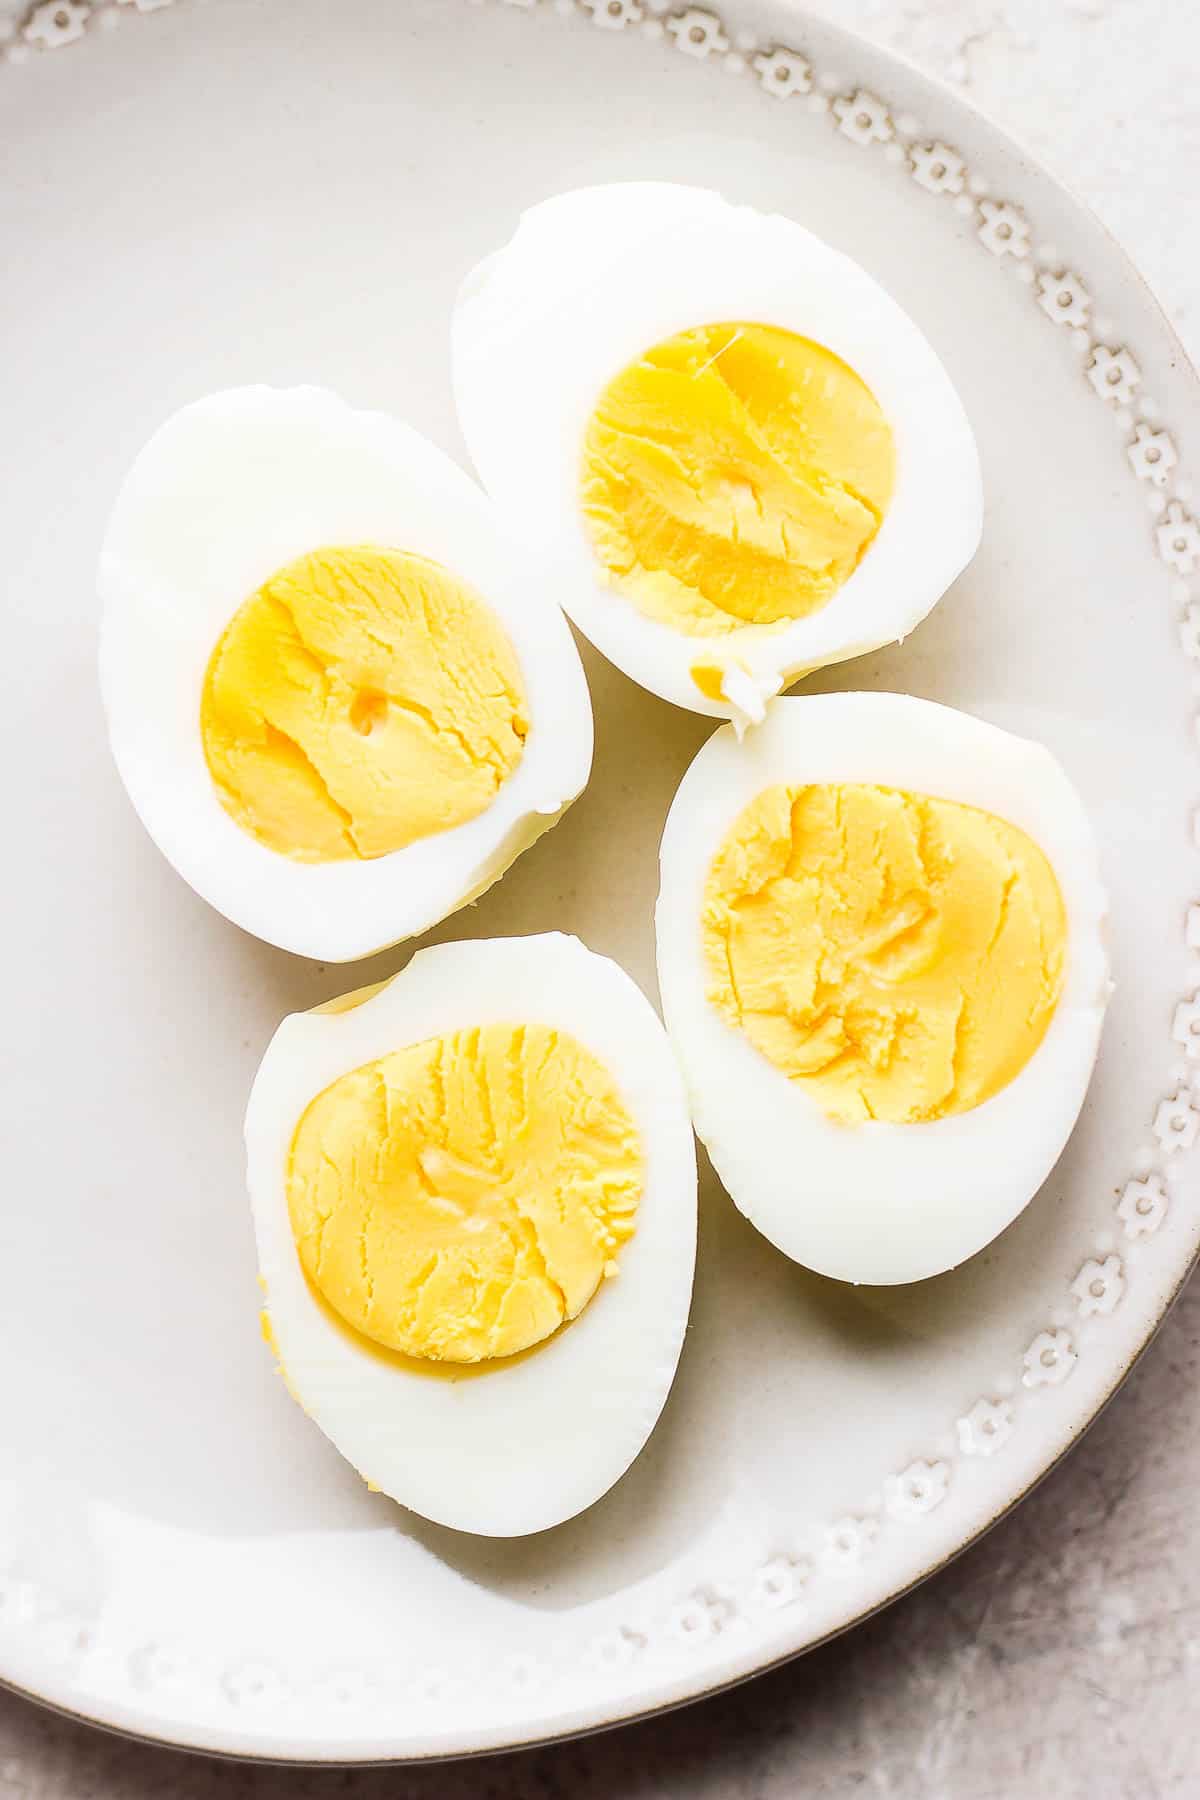 Two hard boiled eggs, cut lengthwise, on a plate.